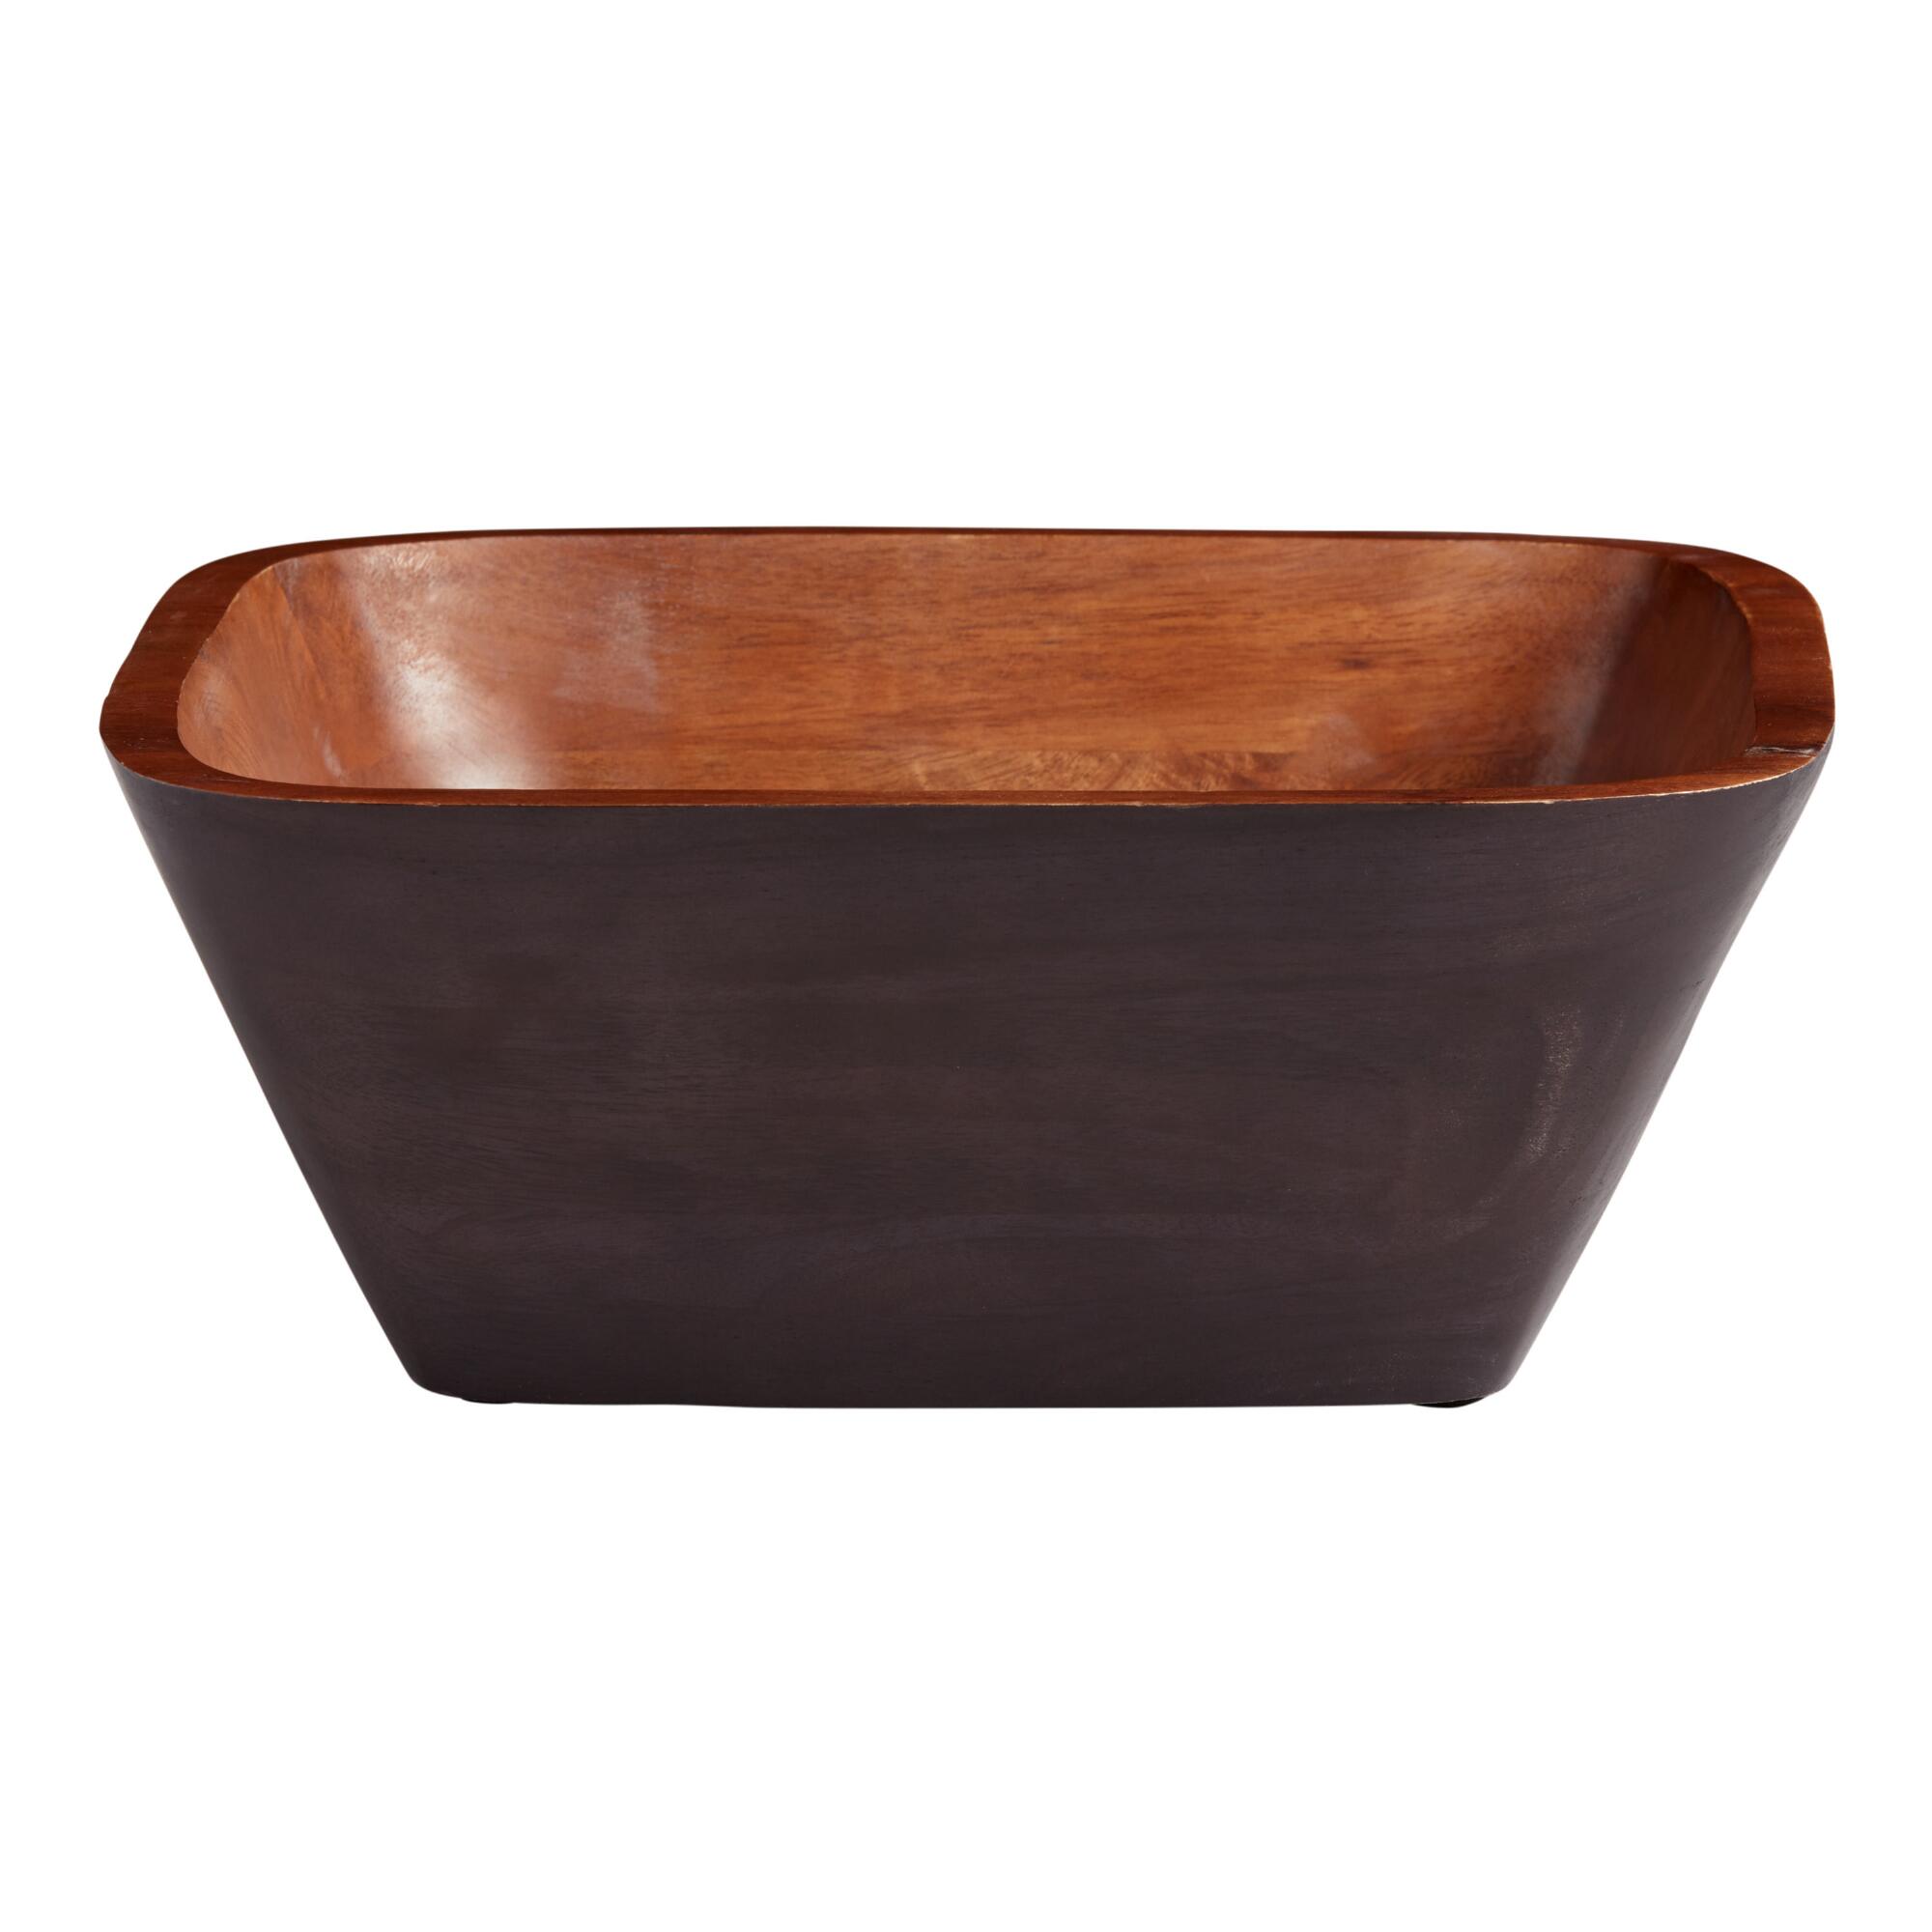 Square Black and Natural Wood Serving Bowl by World Market